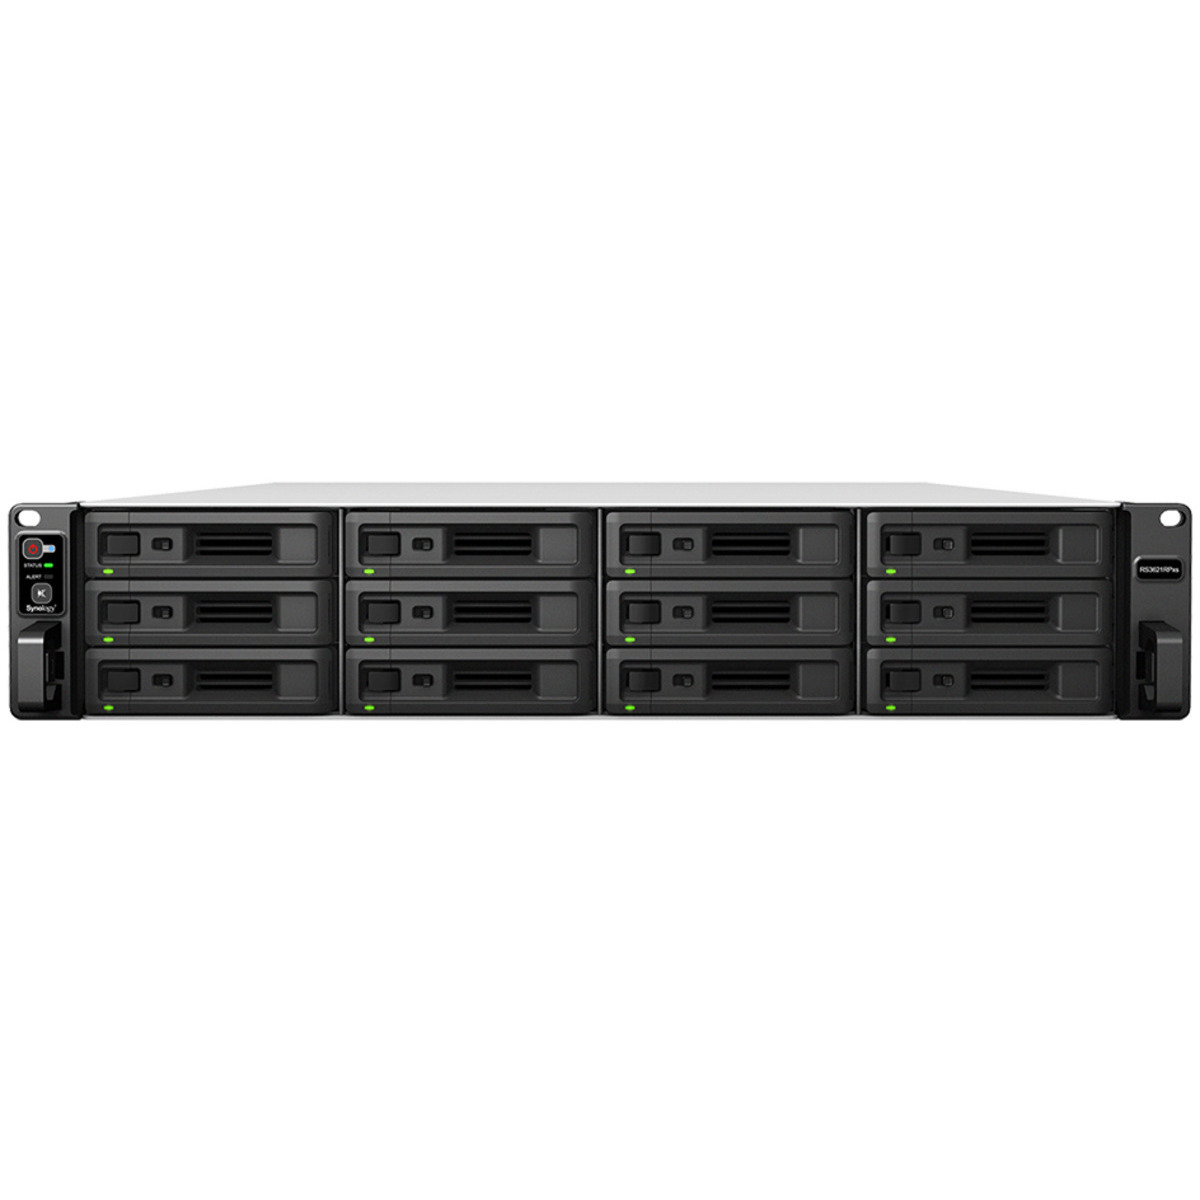 Synology RackStation RS3621RPxs 242tb 12-Bay RackMount Large Business / Enterprise NAS - Network Attached Storage Device 11x22tb Seagate IronWolf Pro ST22000NT001 3.5 7200rpm SATA 6Gb/s HDD NAS Class Drives Installed - Burn-In Tested RackStation RS3621RPxs